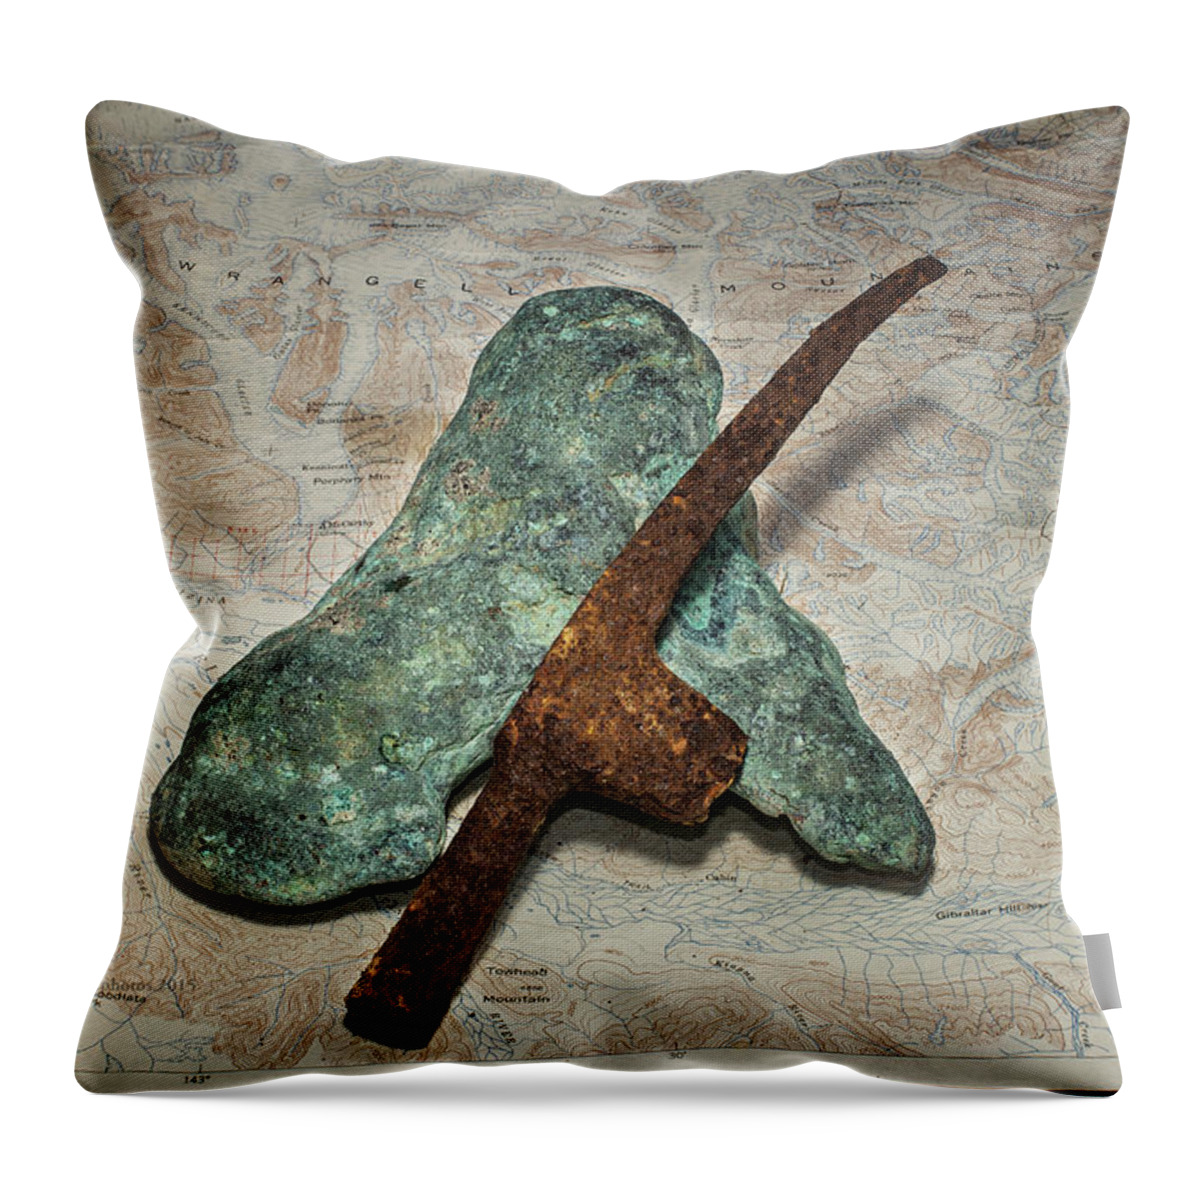 Copper Nugget Throw Pillow featuring the photograph Copper Nugget Rock Hammer and Map by Fred Denner